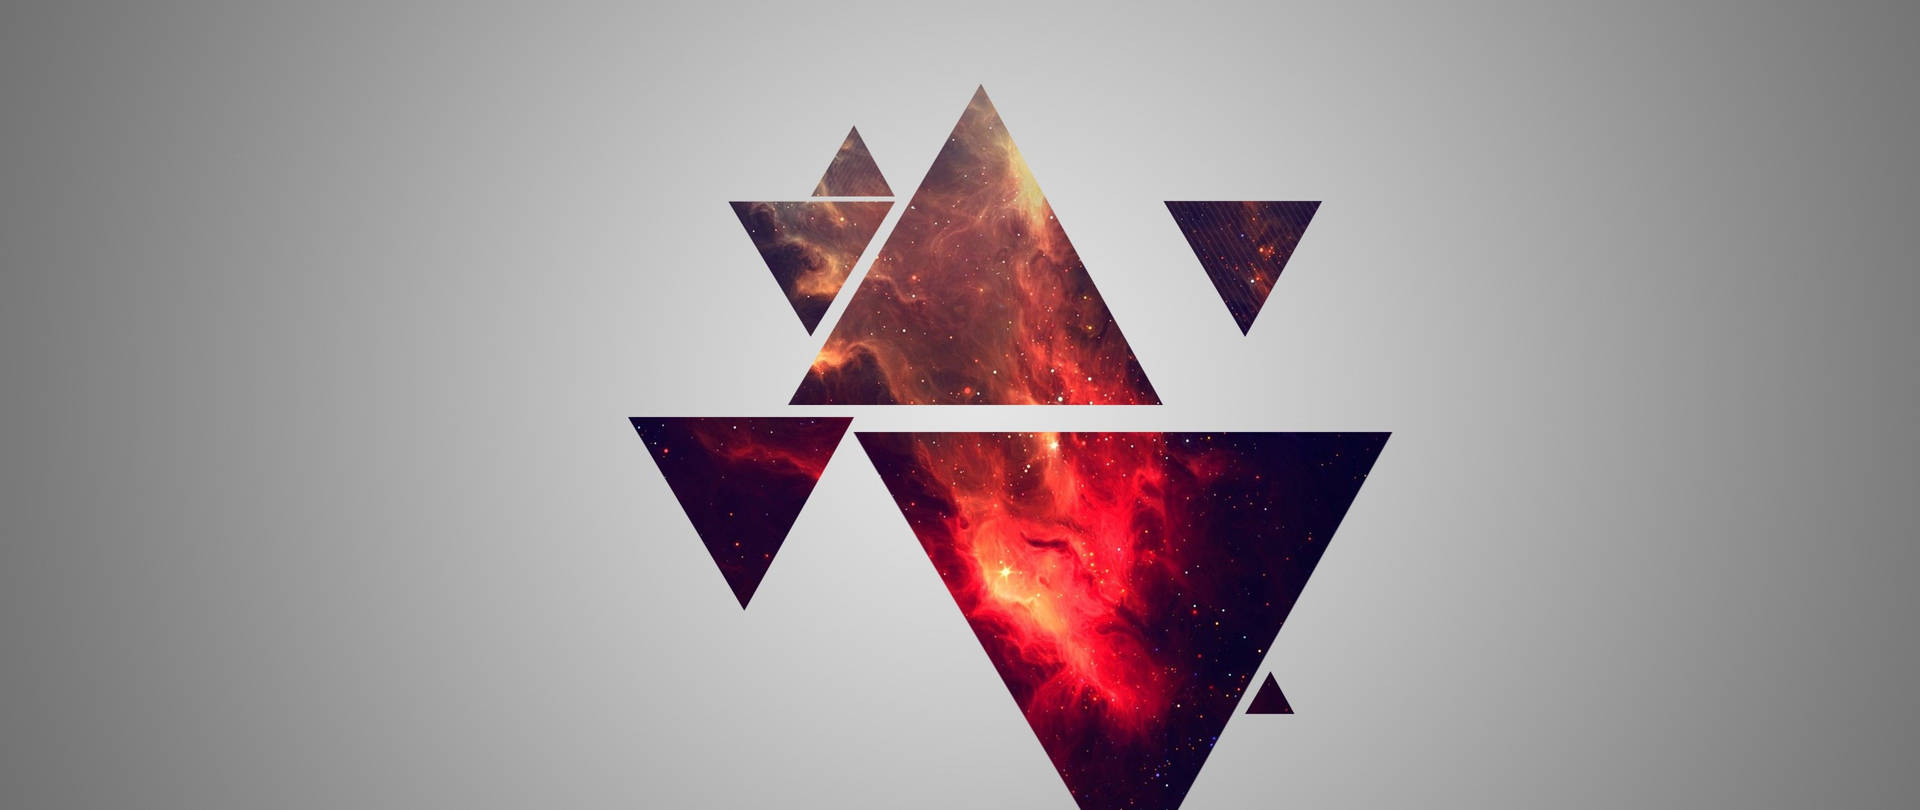 Galactic Triangles Abstract Design Wallpaper